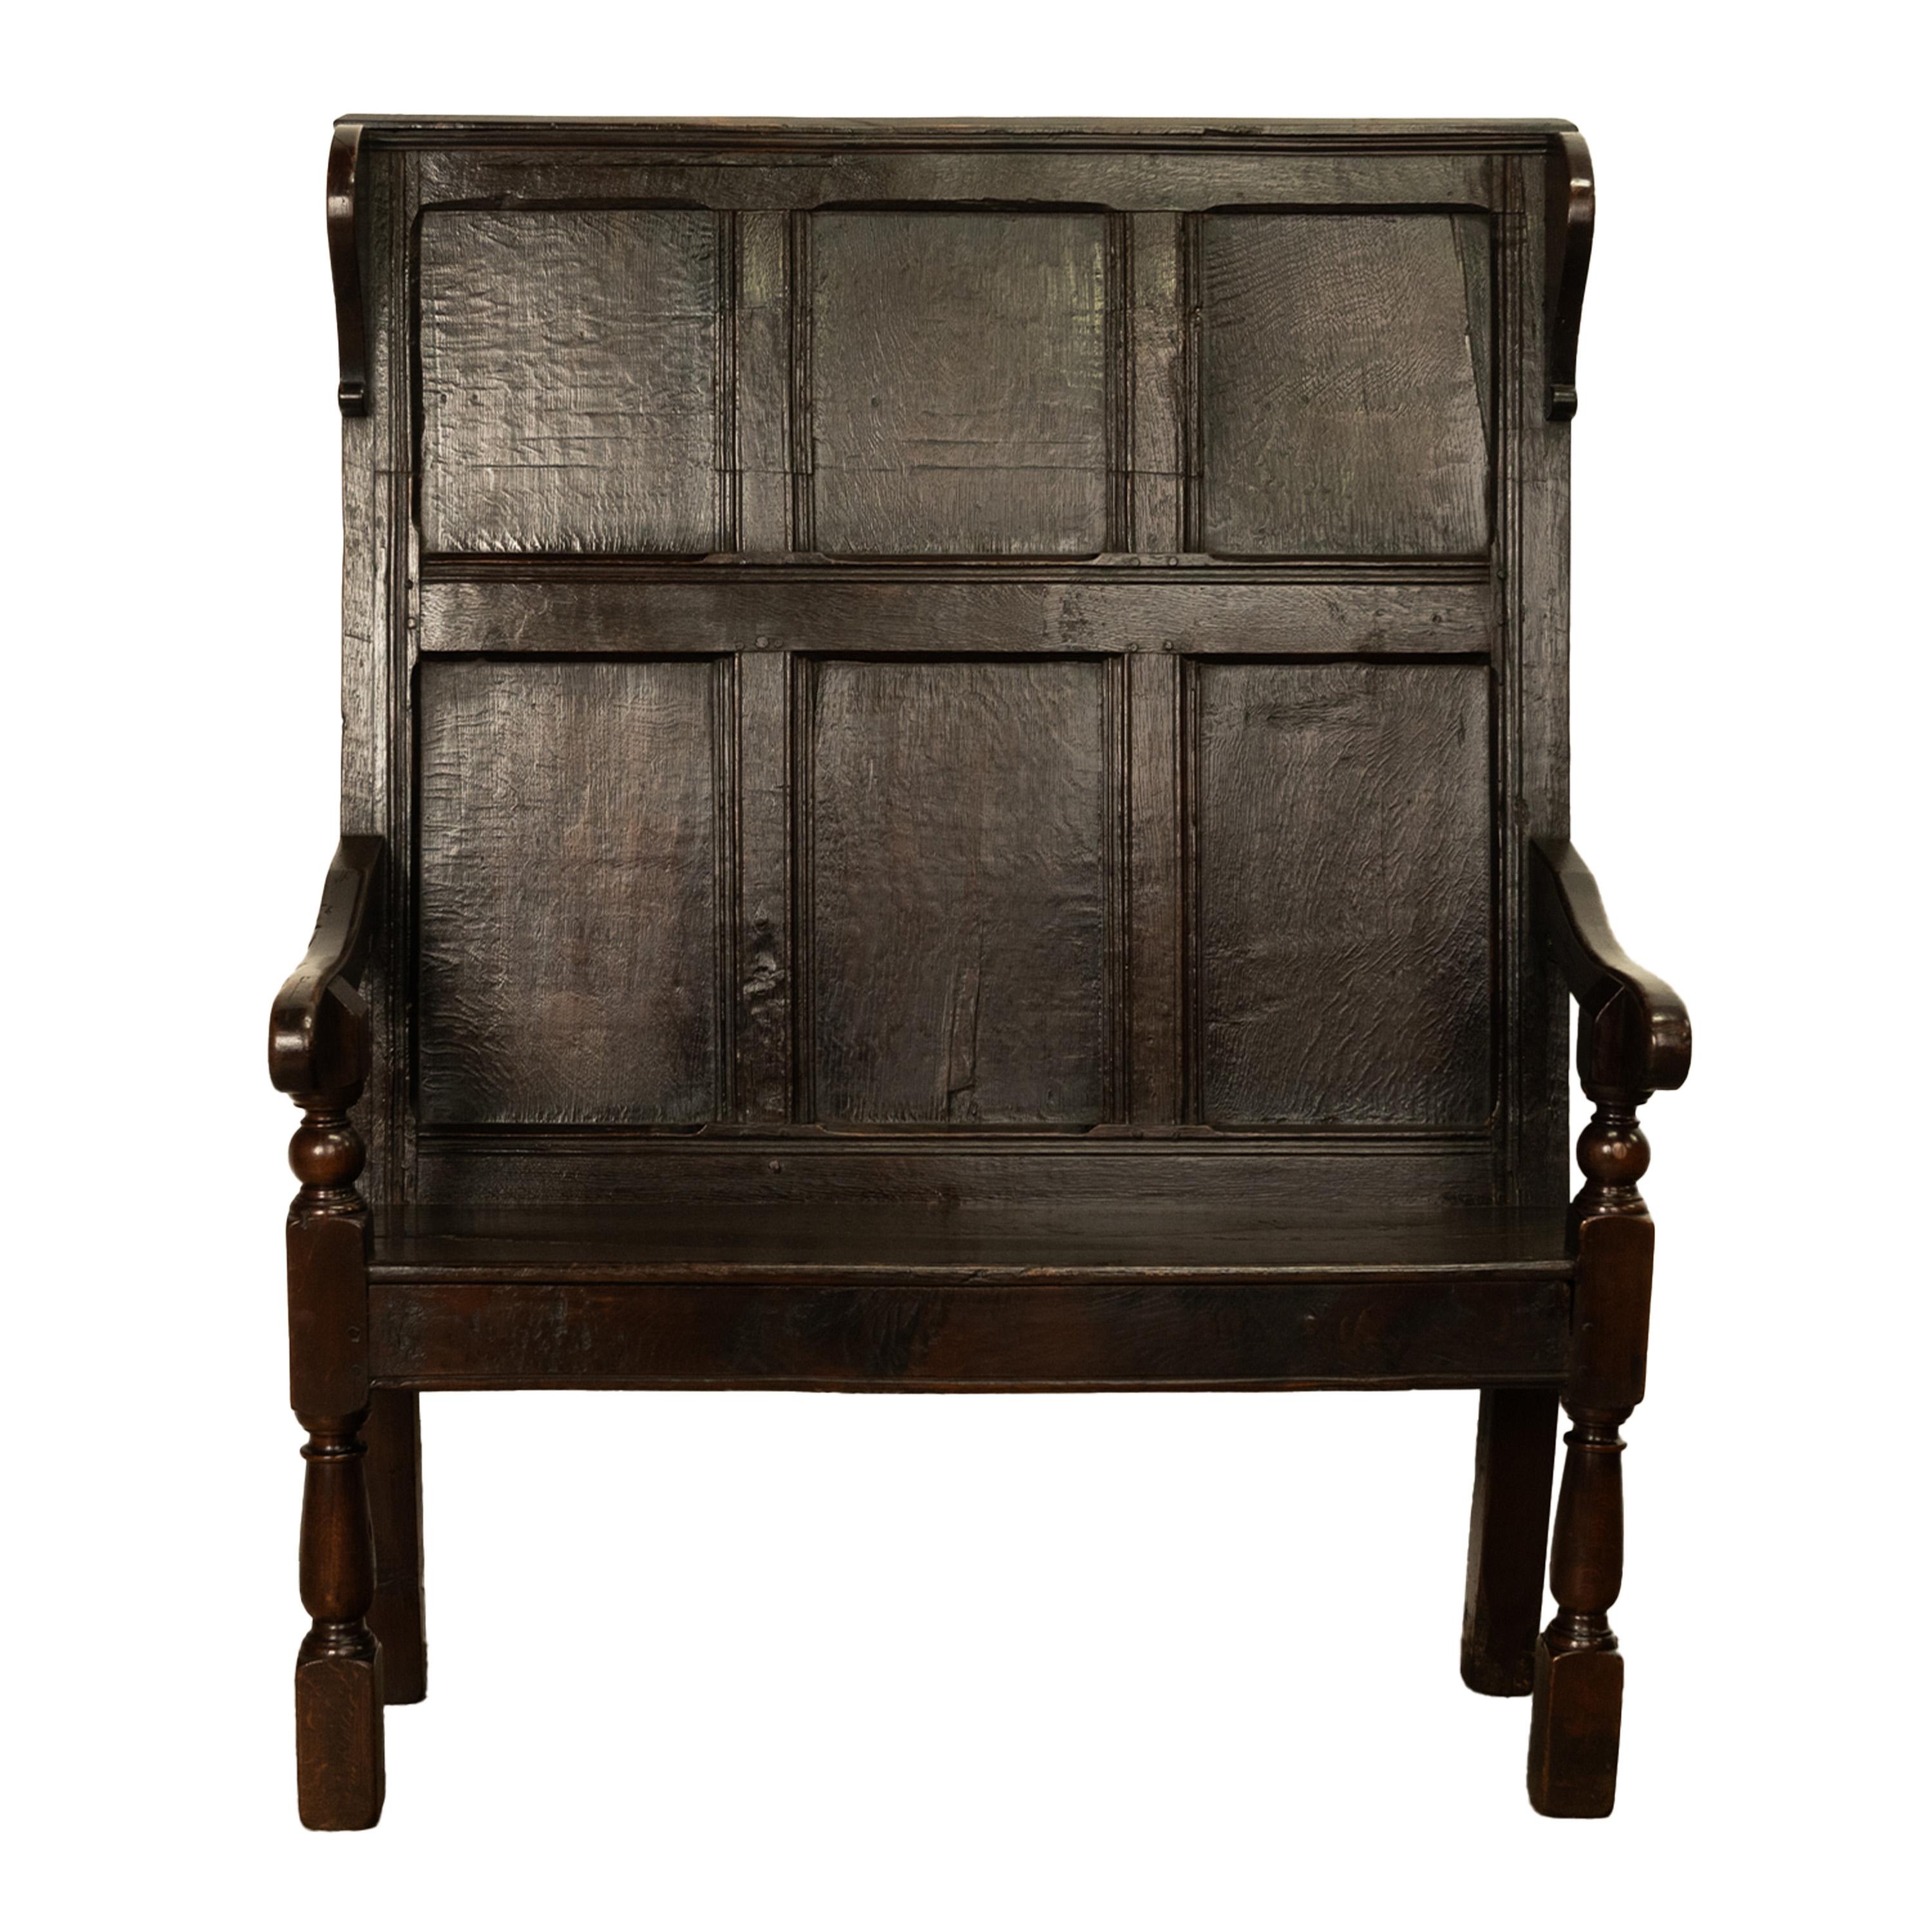 A rare antique oak settle from the Reign of King James I (1603-1625), the settle having provenance from Anne Hathaway's (Shakespeare's wife) cottage, Stratford-upon-Avon.
A tall back, yet diminutive Jacobean oak settle, the six panel back having